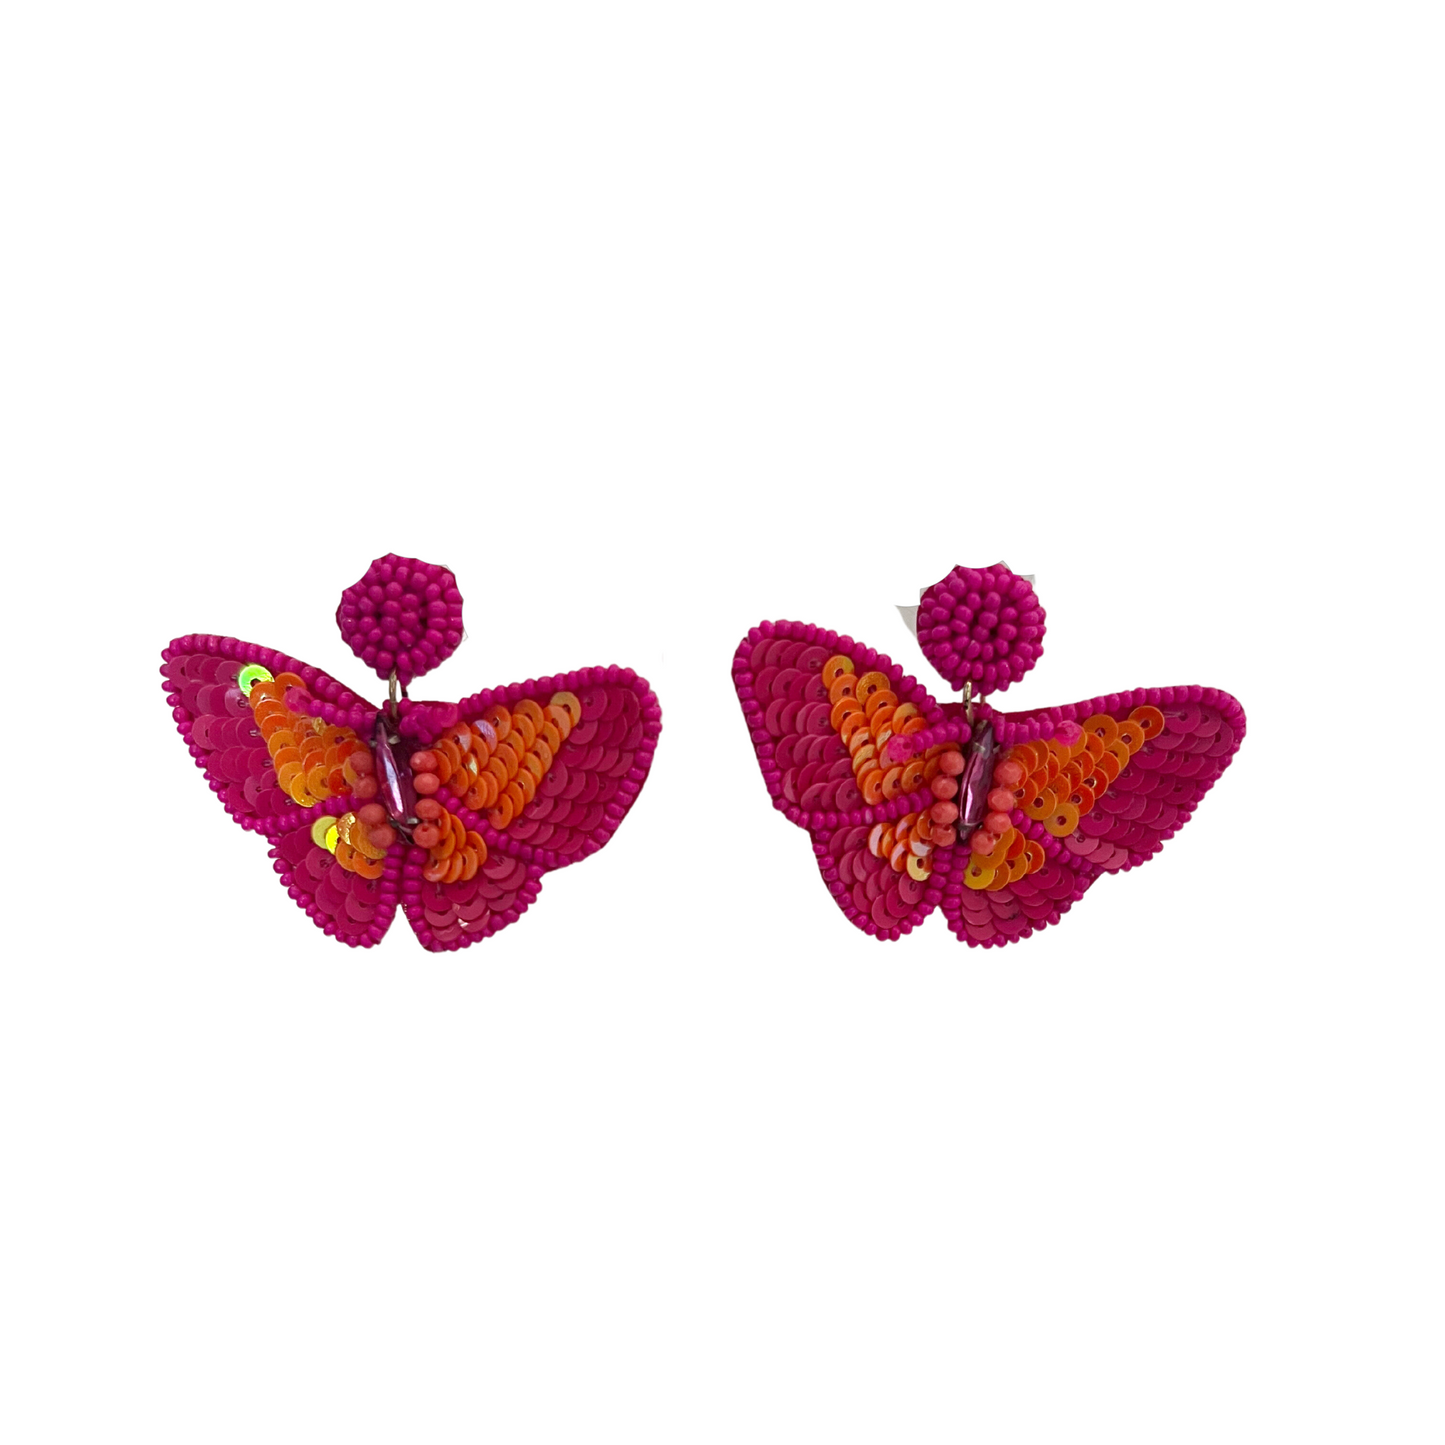 Add a beautiful and vibrant touch to any look with these Drop Beaded Butterfly Earrings. Light and airy, these earrings are made of pink and orange sequins for a delicate, luxurious look and feature dangle design for a timeless, classic style. Perfect for adding some elegant sparkle to any ensemble.